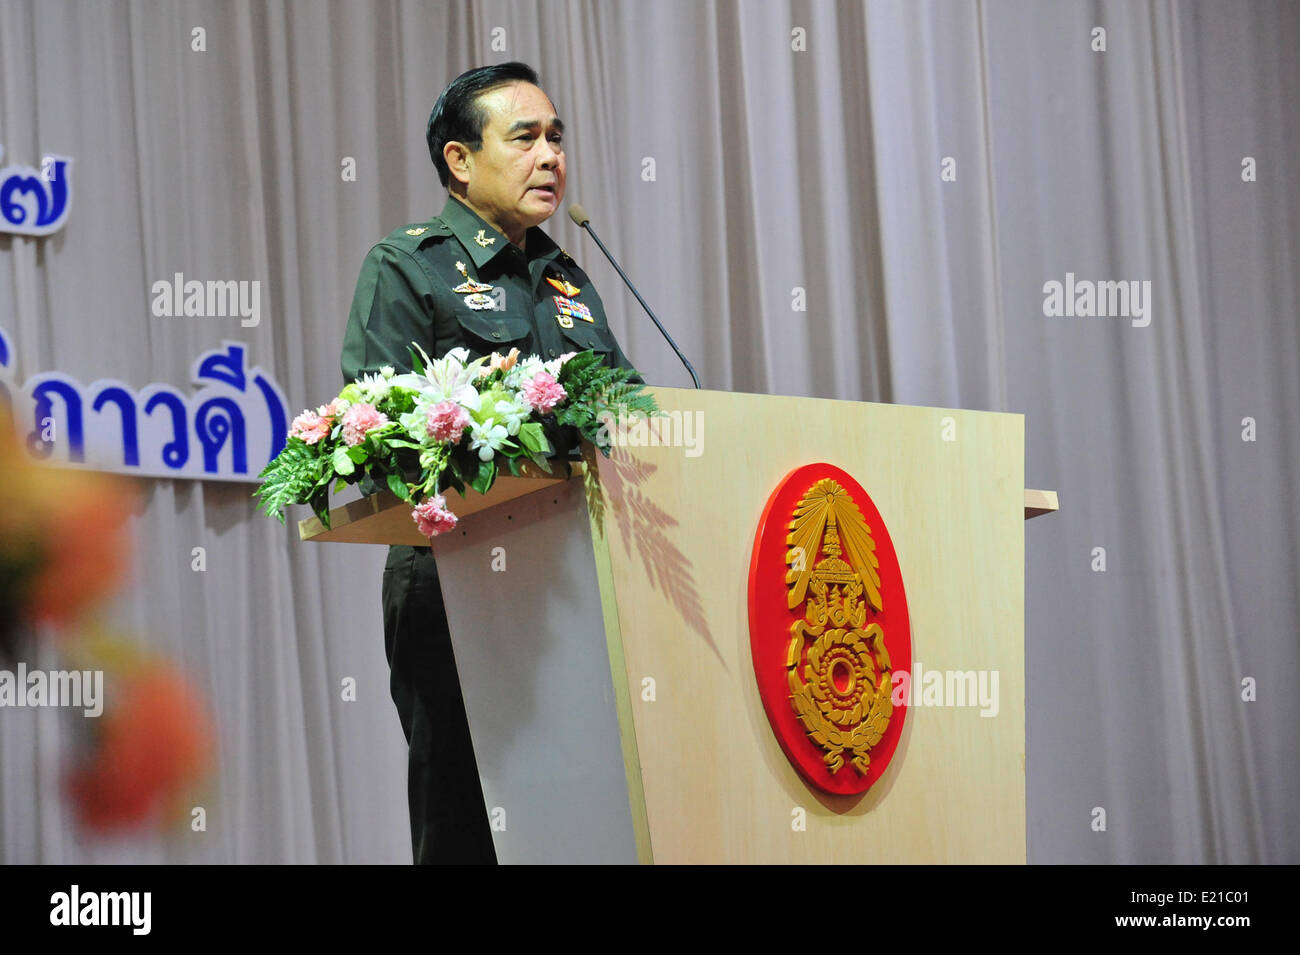 Bangkok, Thailand. 13th June, 2014. Chief of the National Council for Peace and Order (NCPO) Prayuth Chan-ocha speaks at the budget meeting with government agencies in Bangkok, Thailand, June 13, 2014. © Rachen Sageamsak/Xinhua/Alamy Live News Stock Photo